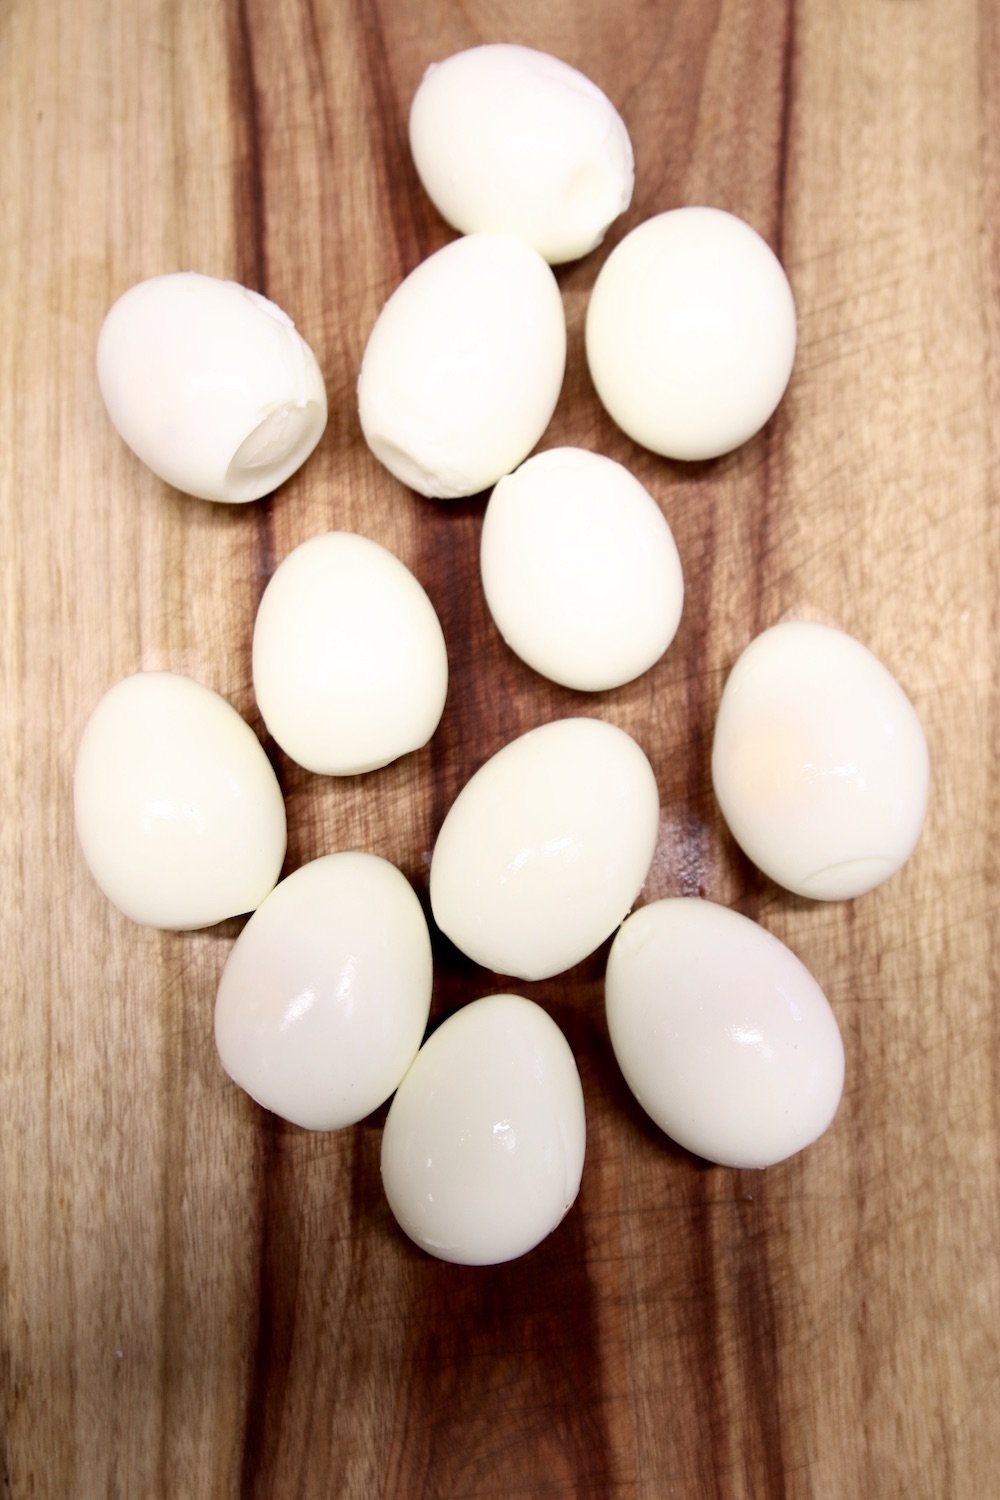 Boiled and peeled eggs on a cutting board